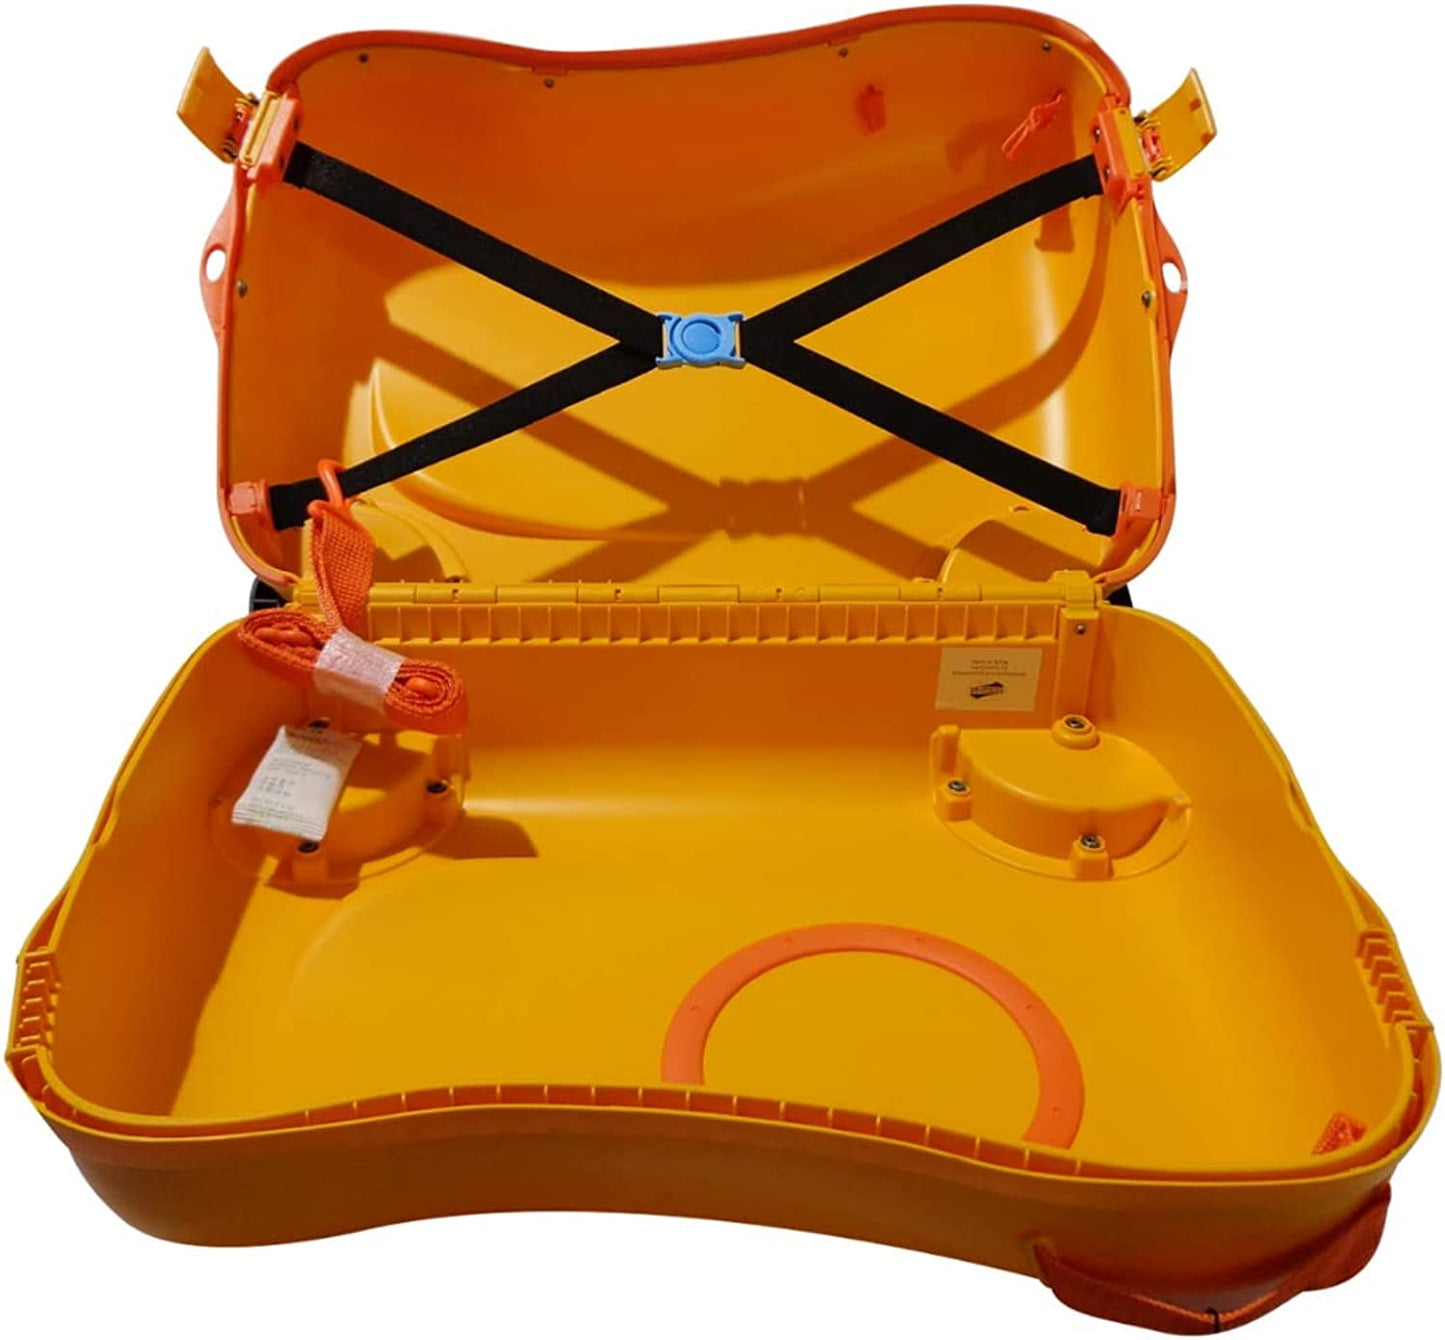 American Tourister Skittle nxt trolly bag